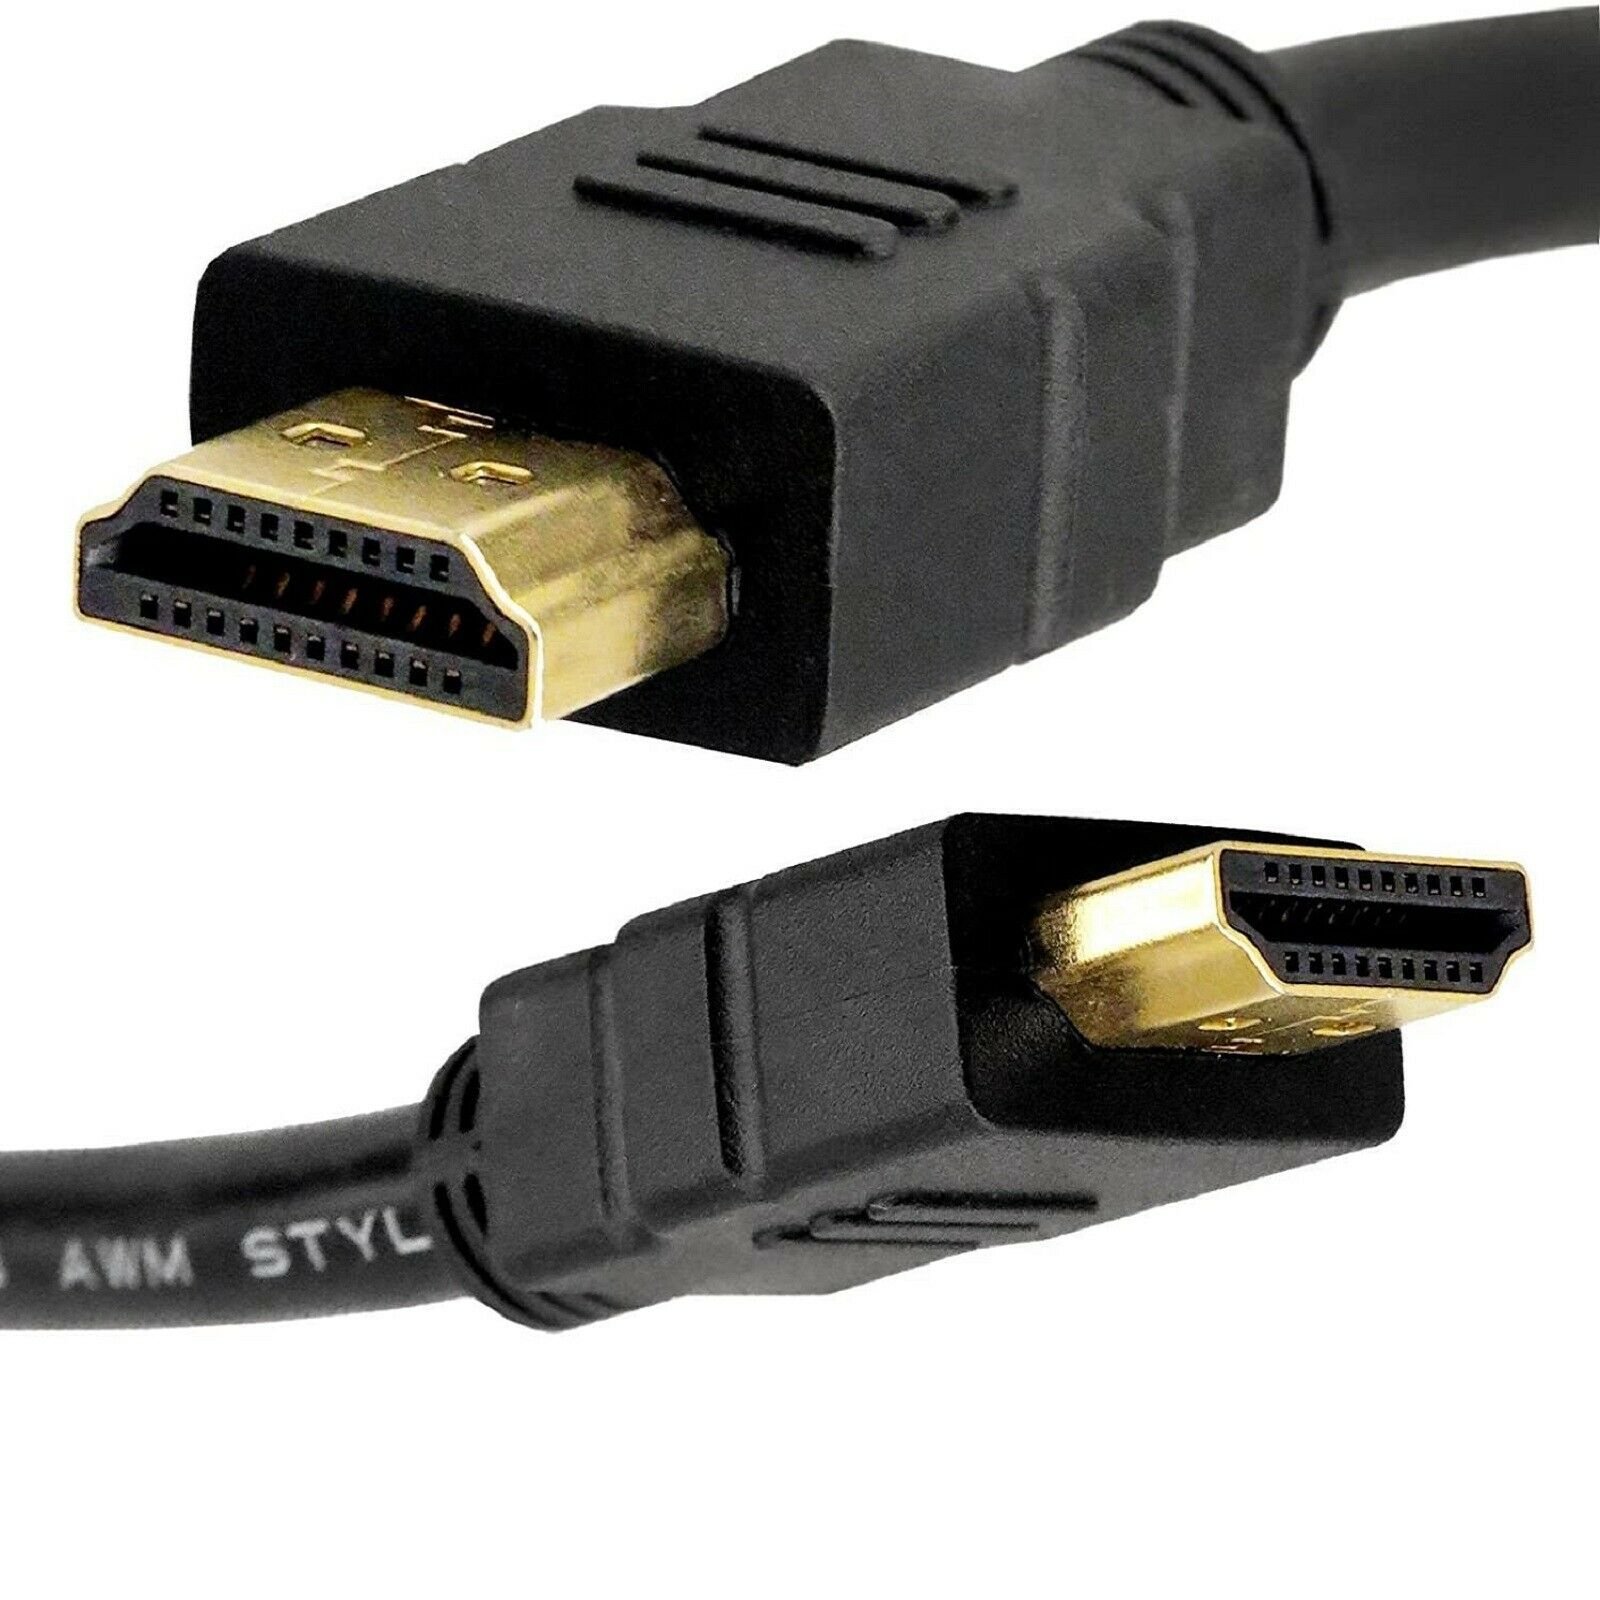 hdmi cable to connect laptop to projector